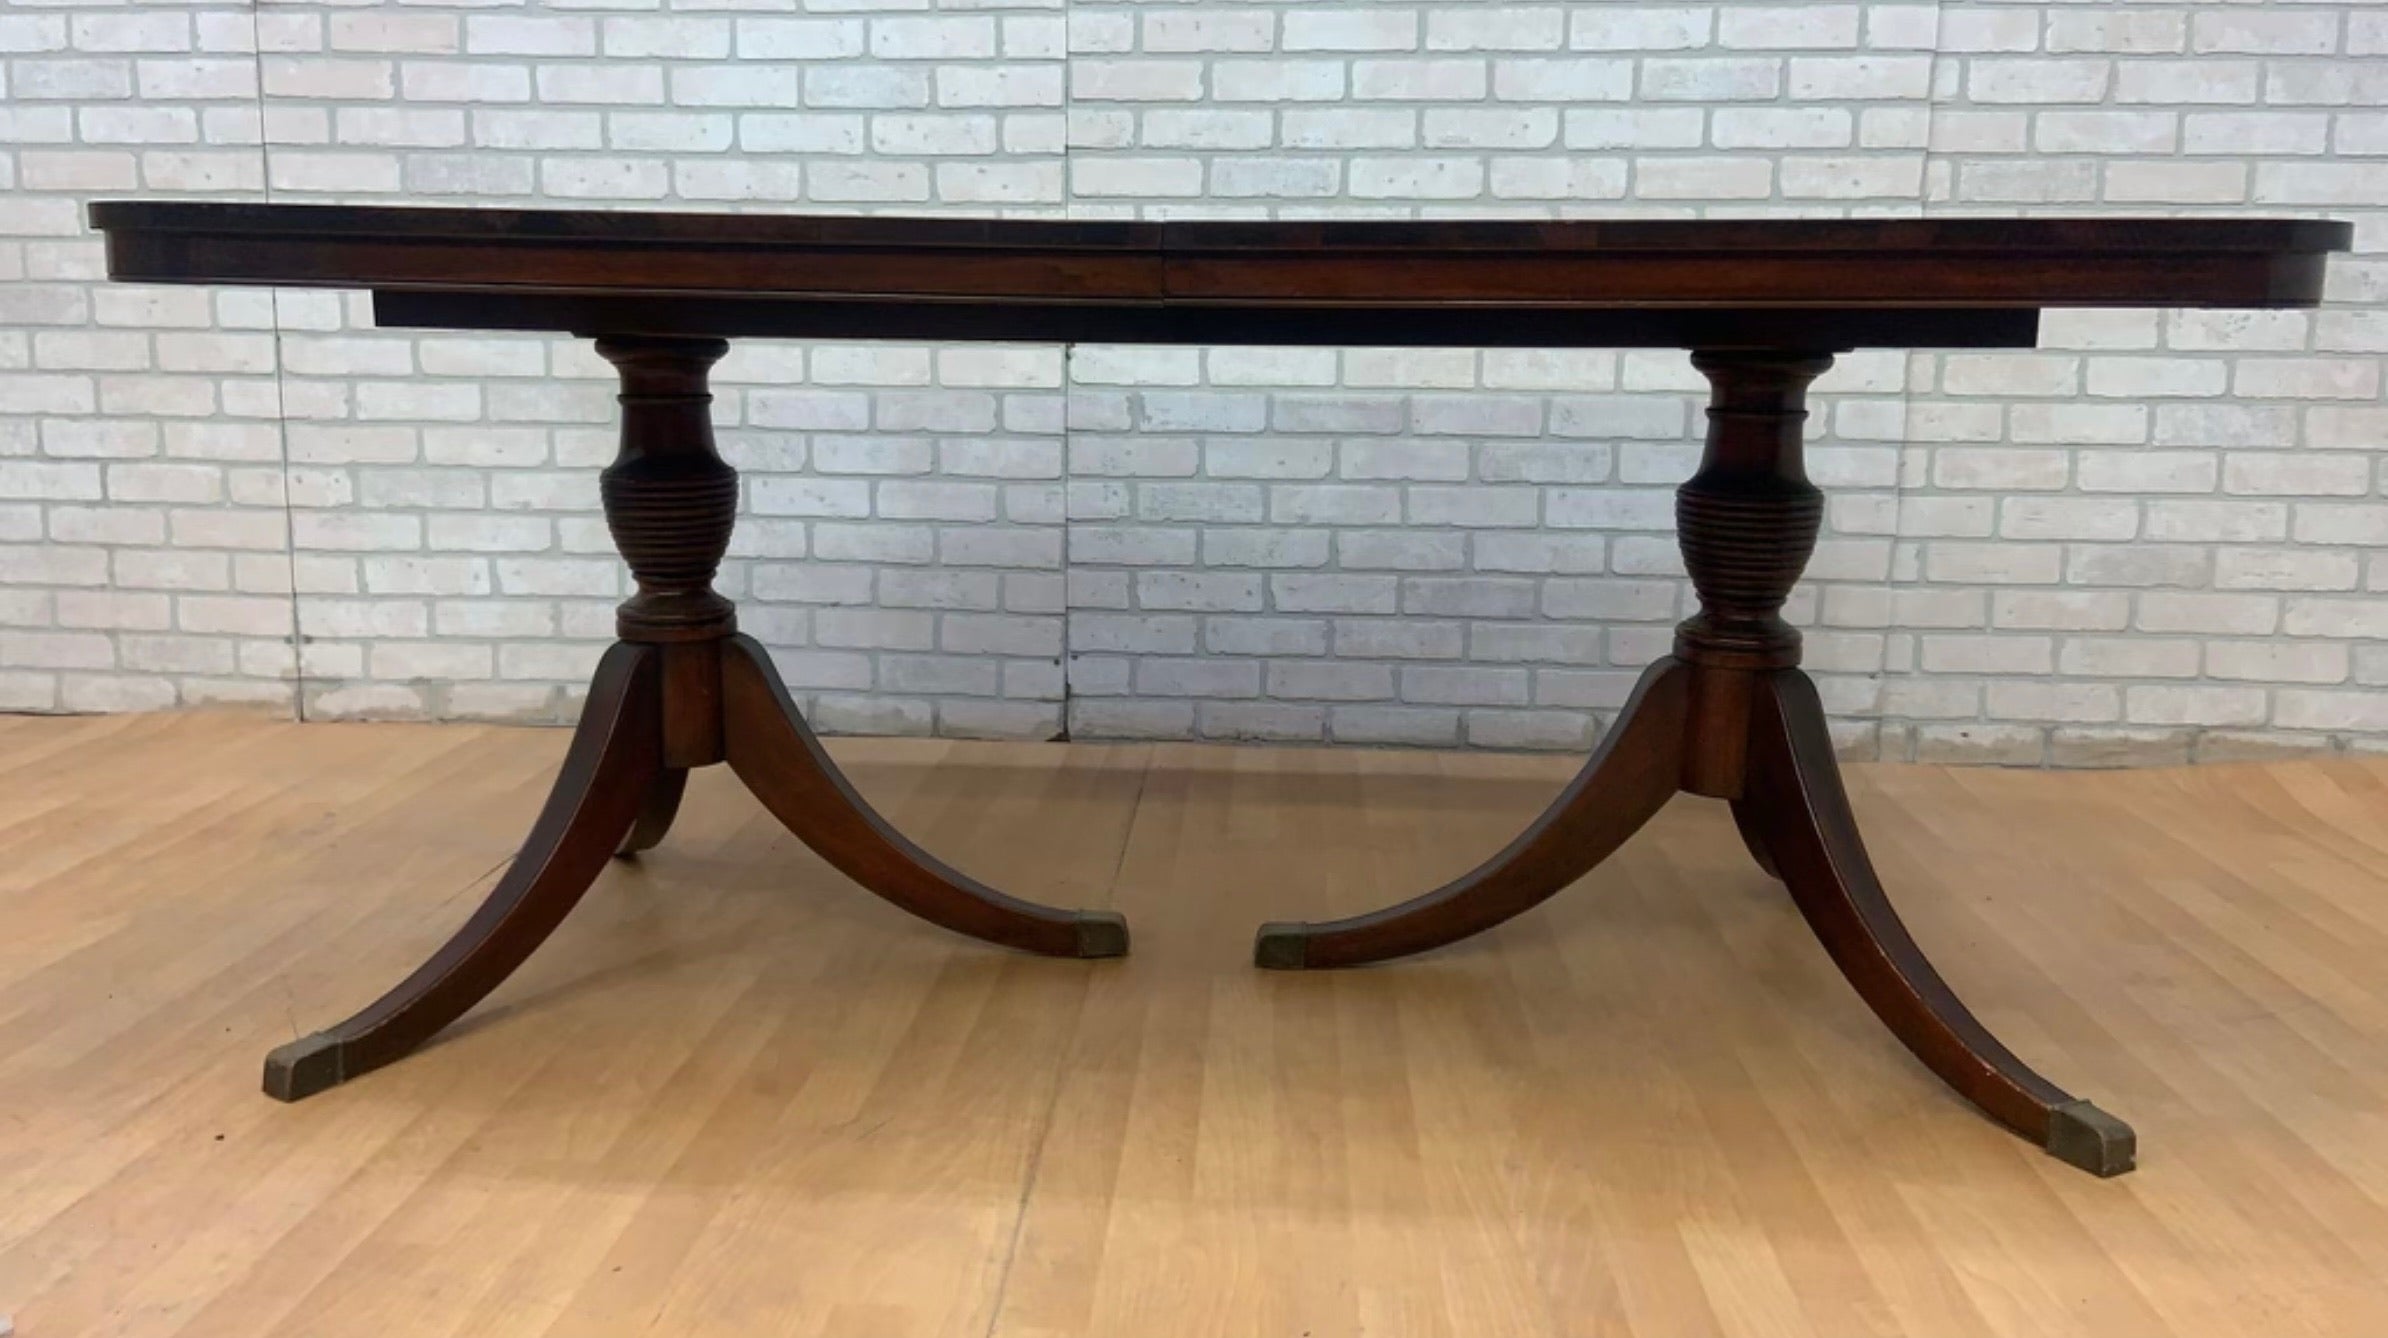 Antique Regency Duncan Phyfe Style Twin Pillar/Pedestal Mahogany Dining Table with 3 Extension Leaves